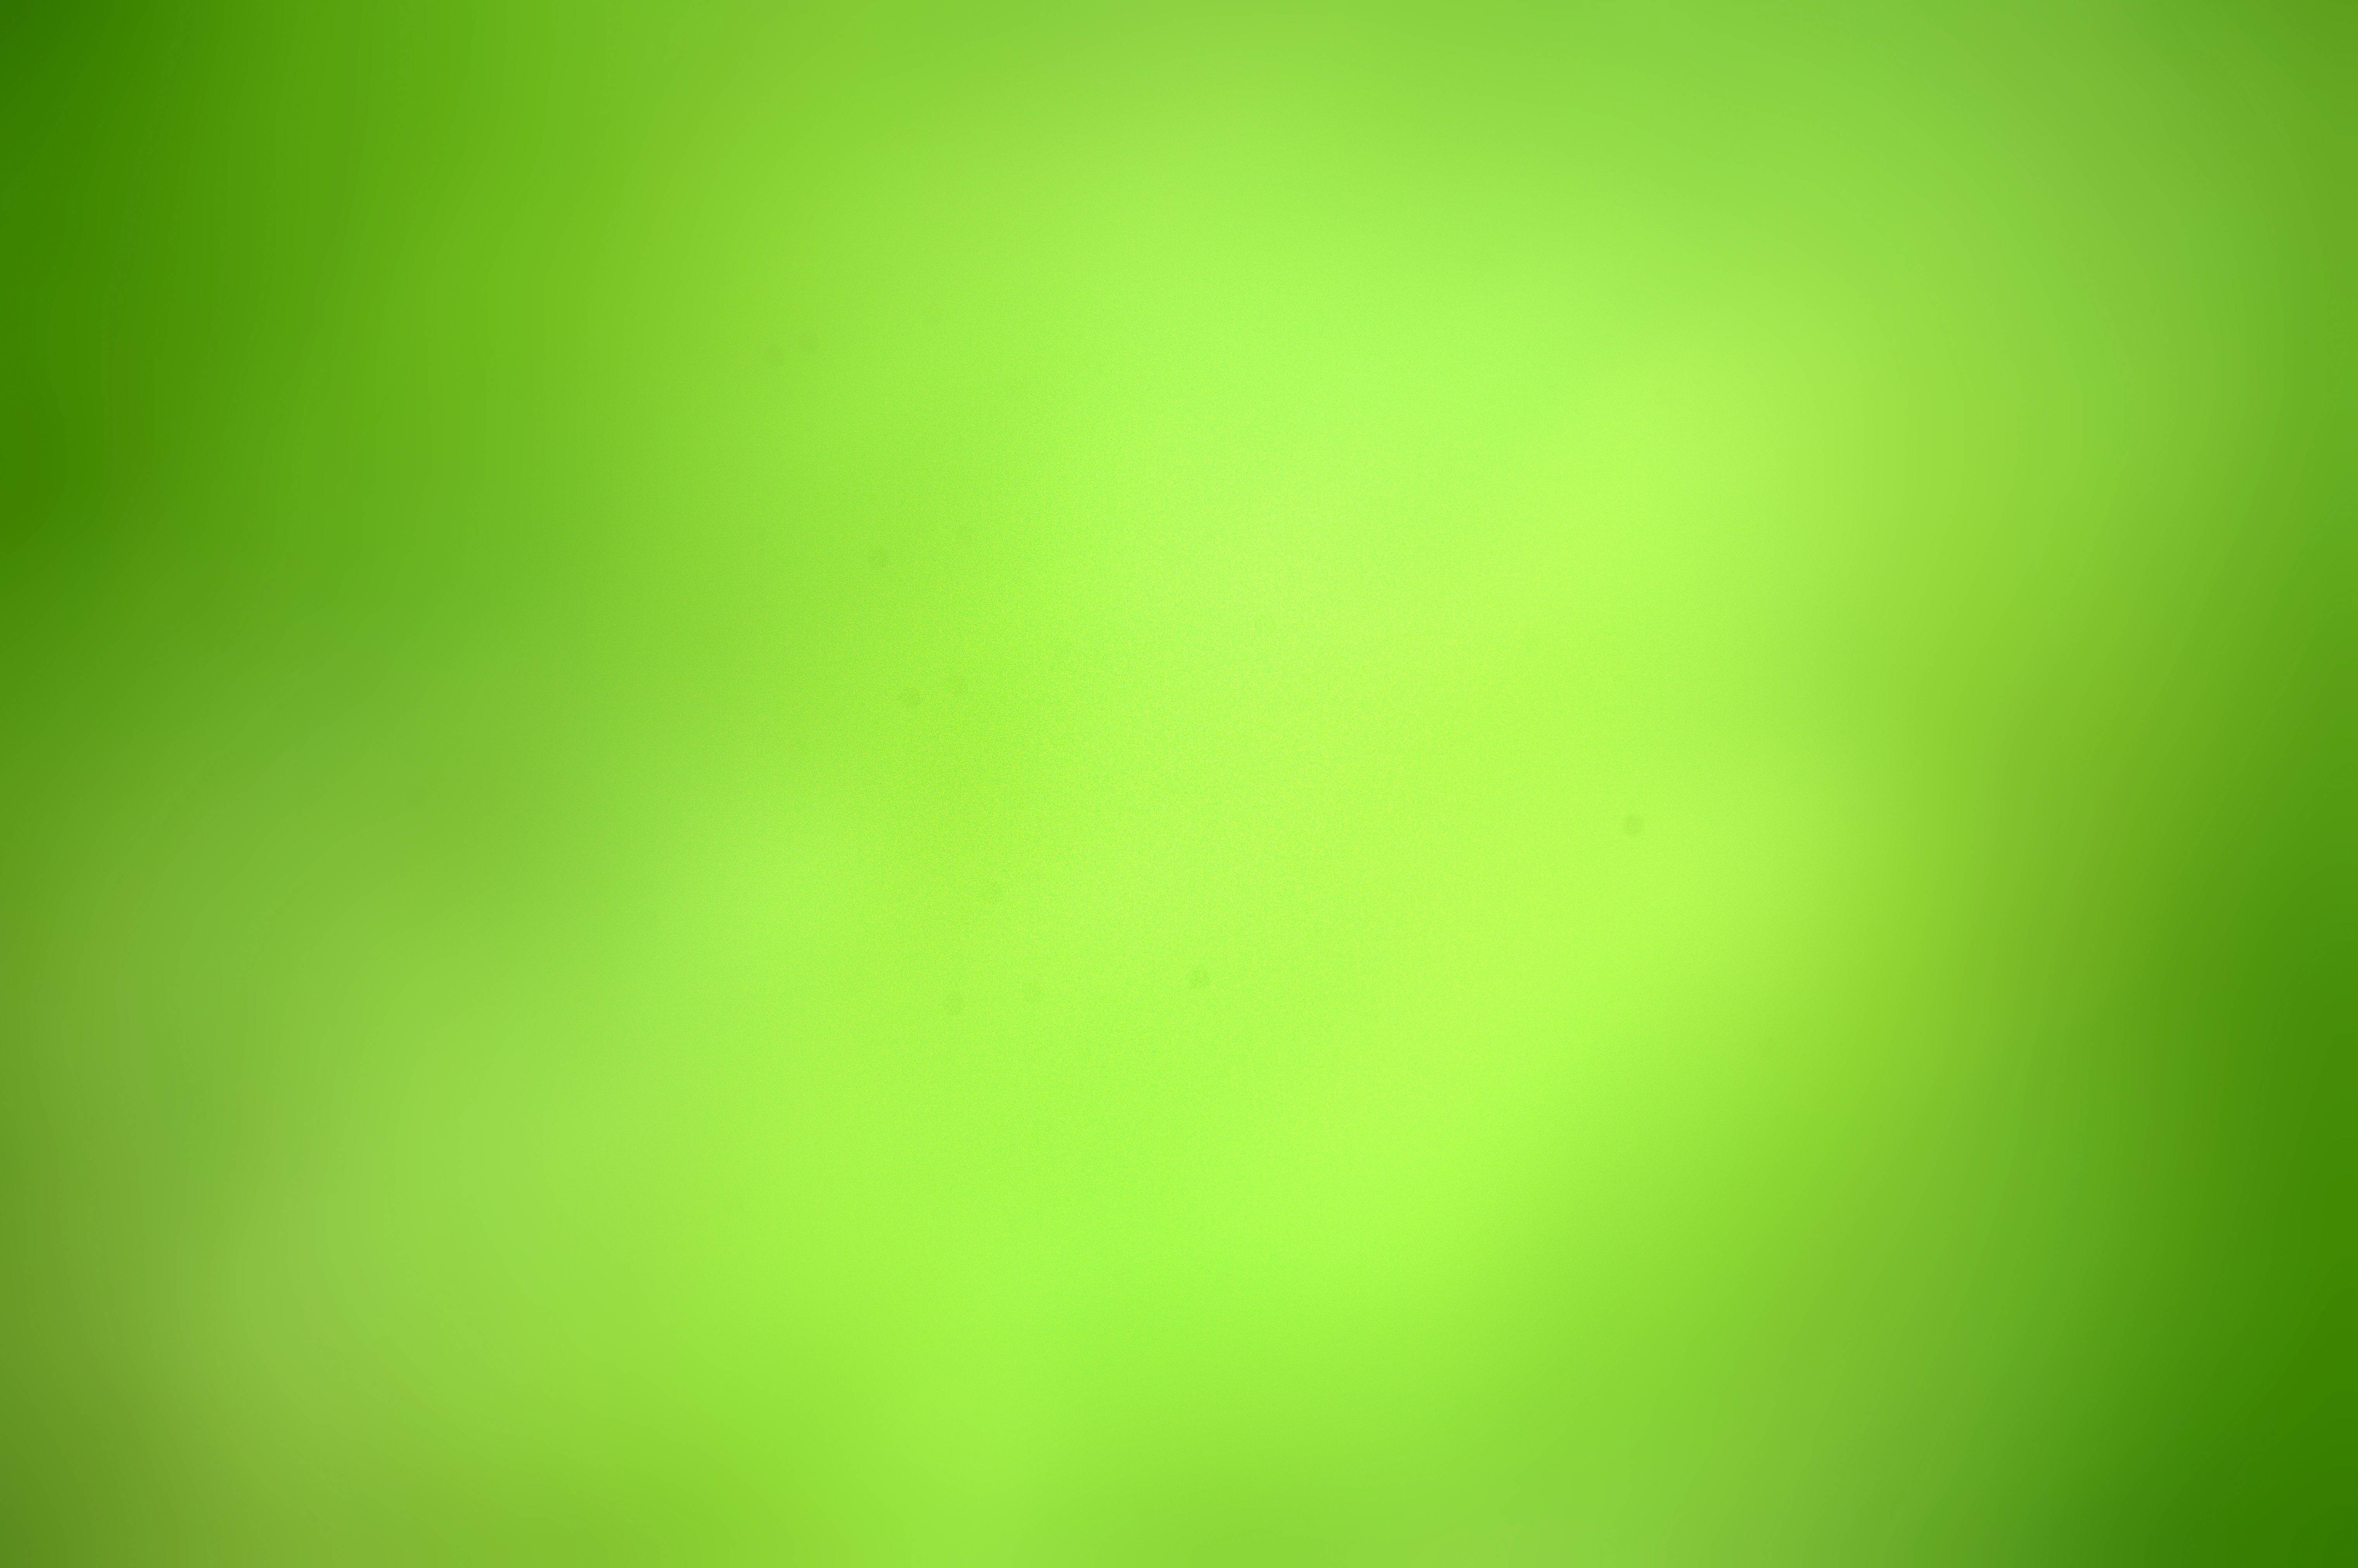 green background images